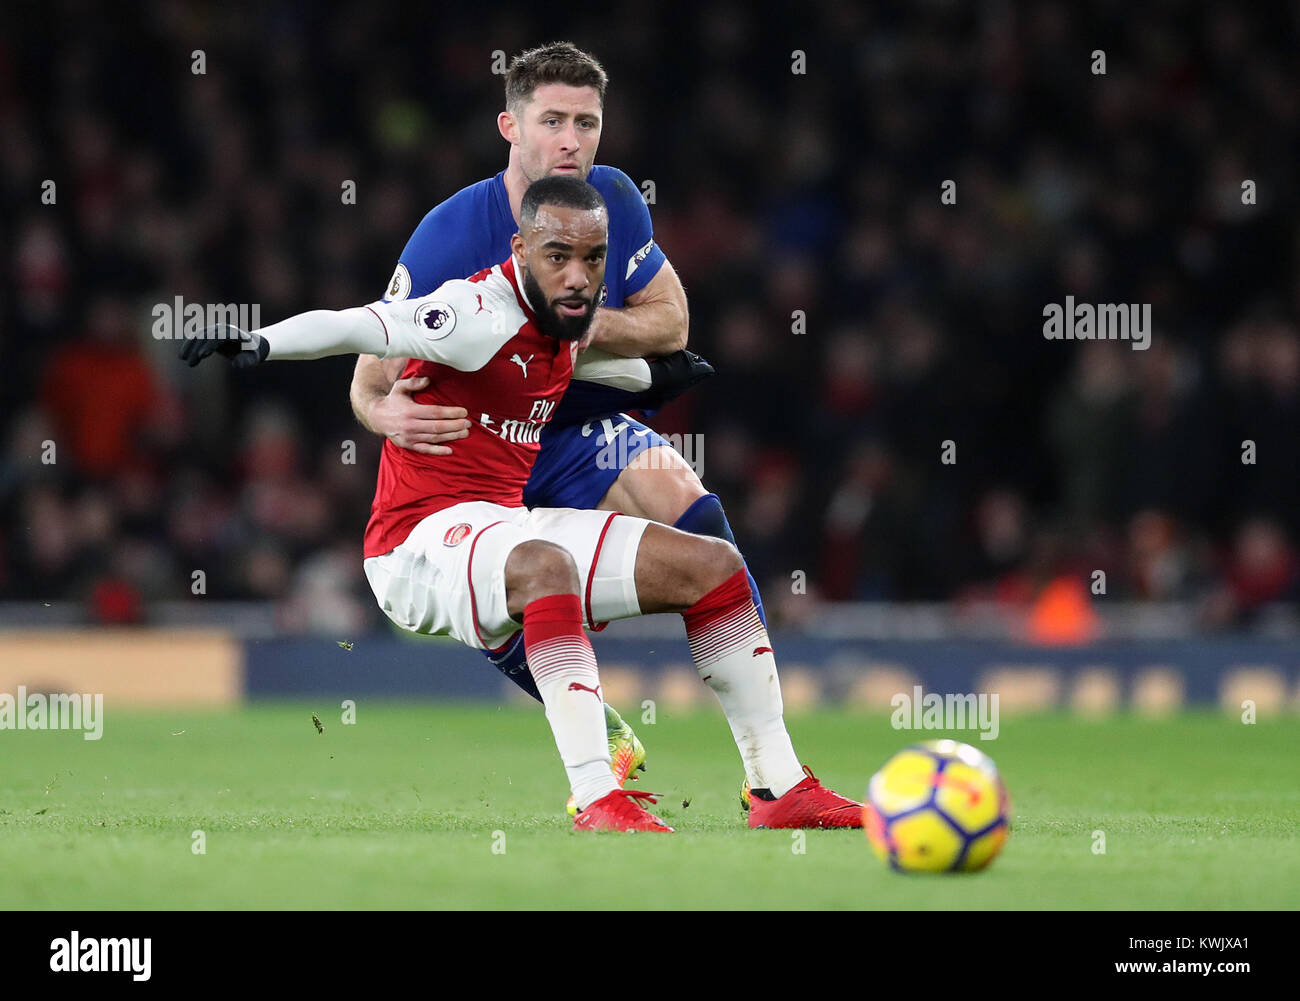 Chelsea's Gary Cahill and Arsenal's Alexandre Lacazette battle for the ball during the Premier League match at the Emirates Stadium, London. PRESS ASSOCIATION Photo. Picture date: Wednesday January 3, 2018. See PA story SOCCER Arsenal. Photo credit should read: Adam Davy/PA Wire. RESTRICTIONS: EDITORIAL USE ONLY No use with unauthorised audio, video, data, fixture lists, club/league logos or 'live' services. Online in-match use limited to 75 images, no video emulation. No use in betting, games or single club/league/player publications. Stock Photo